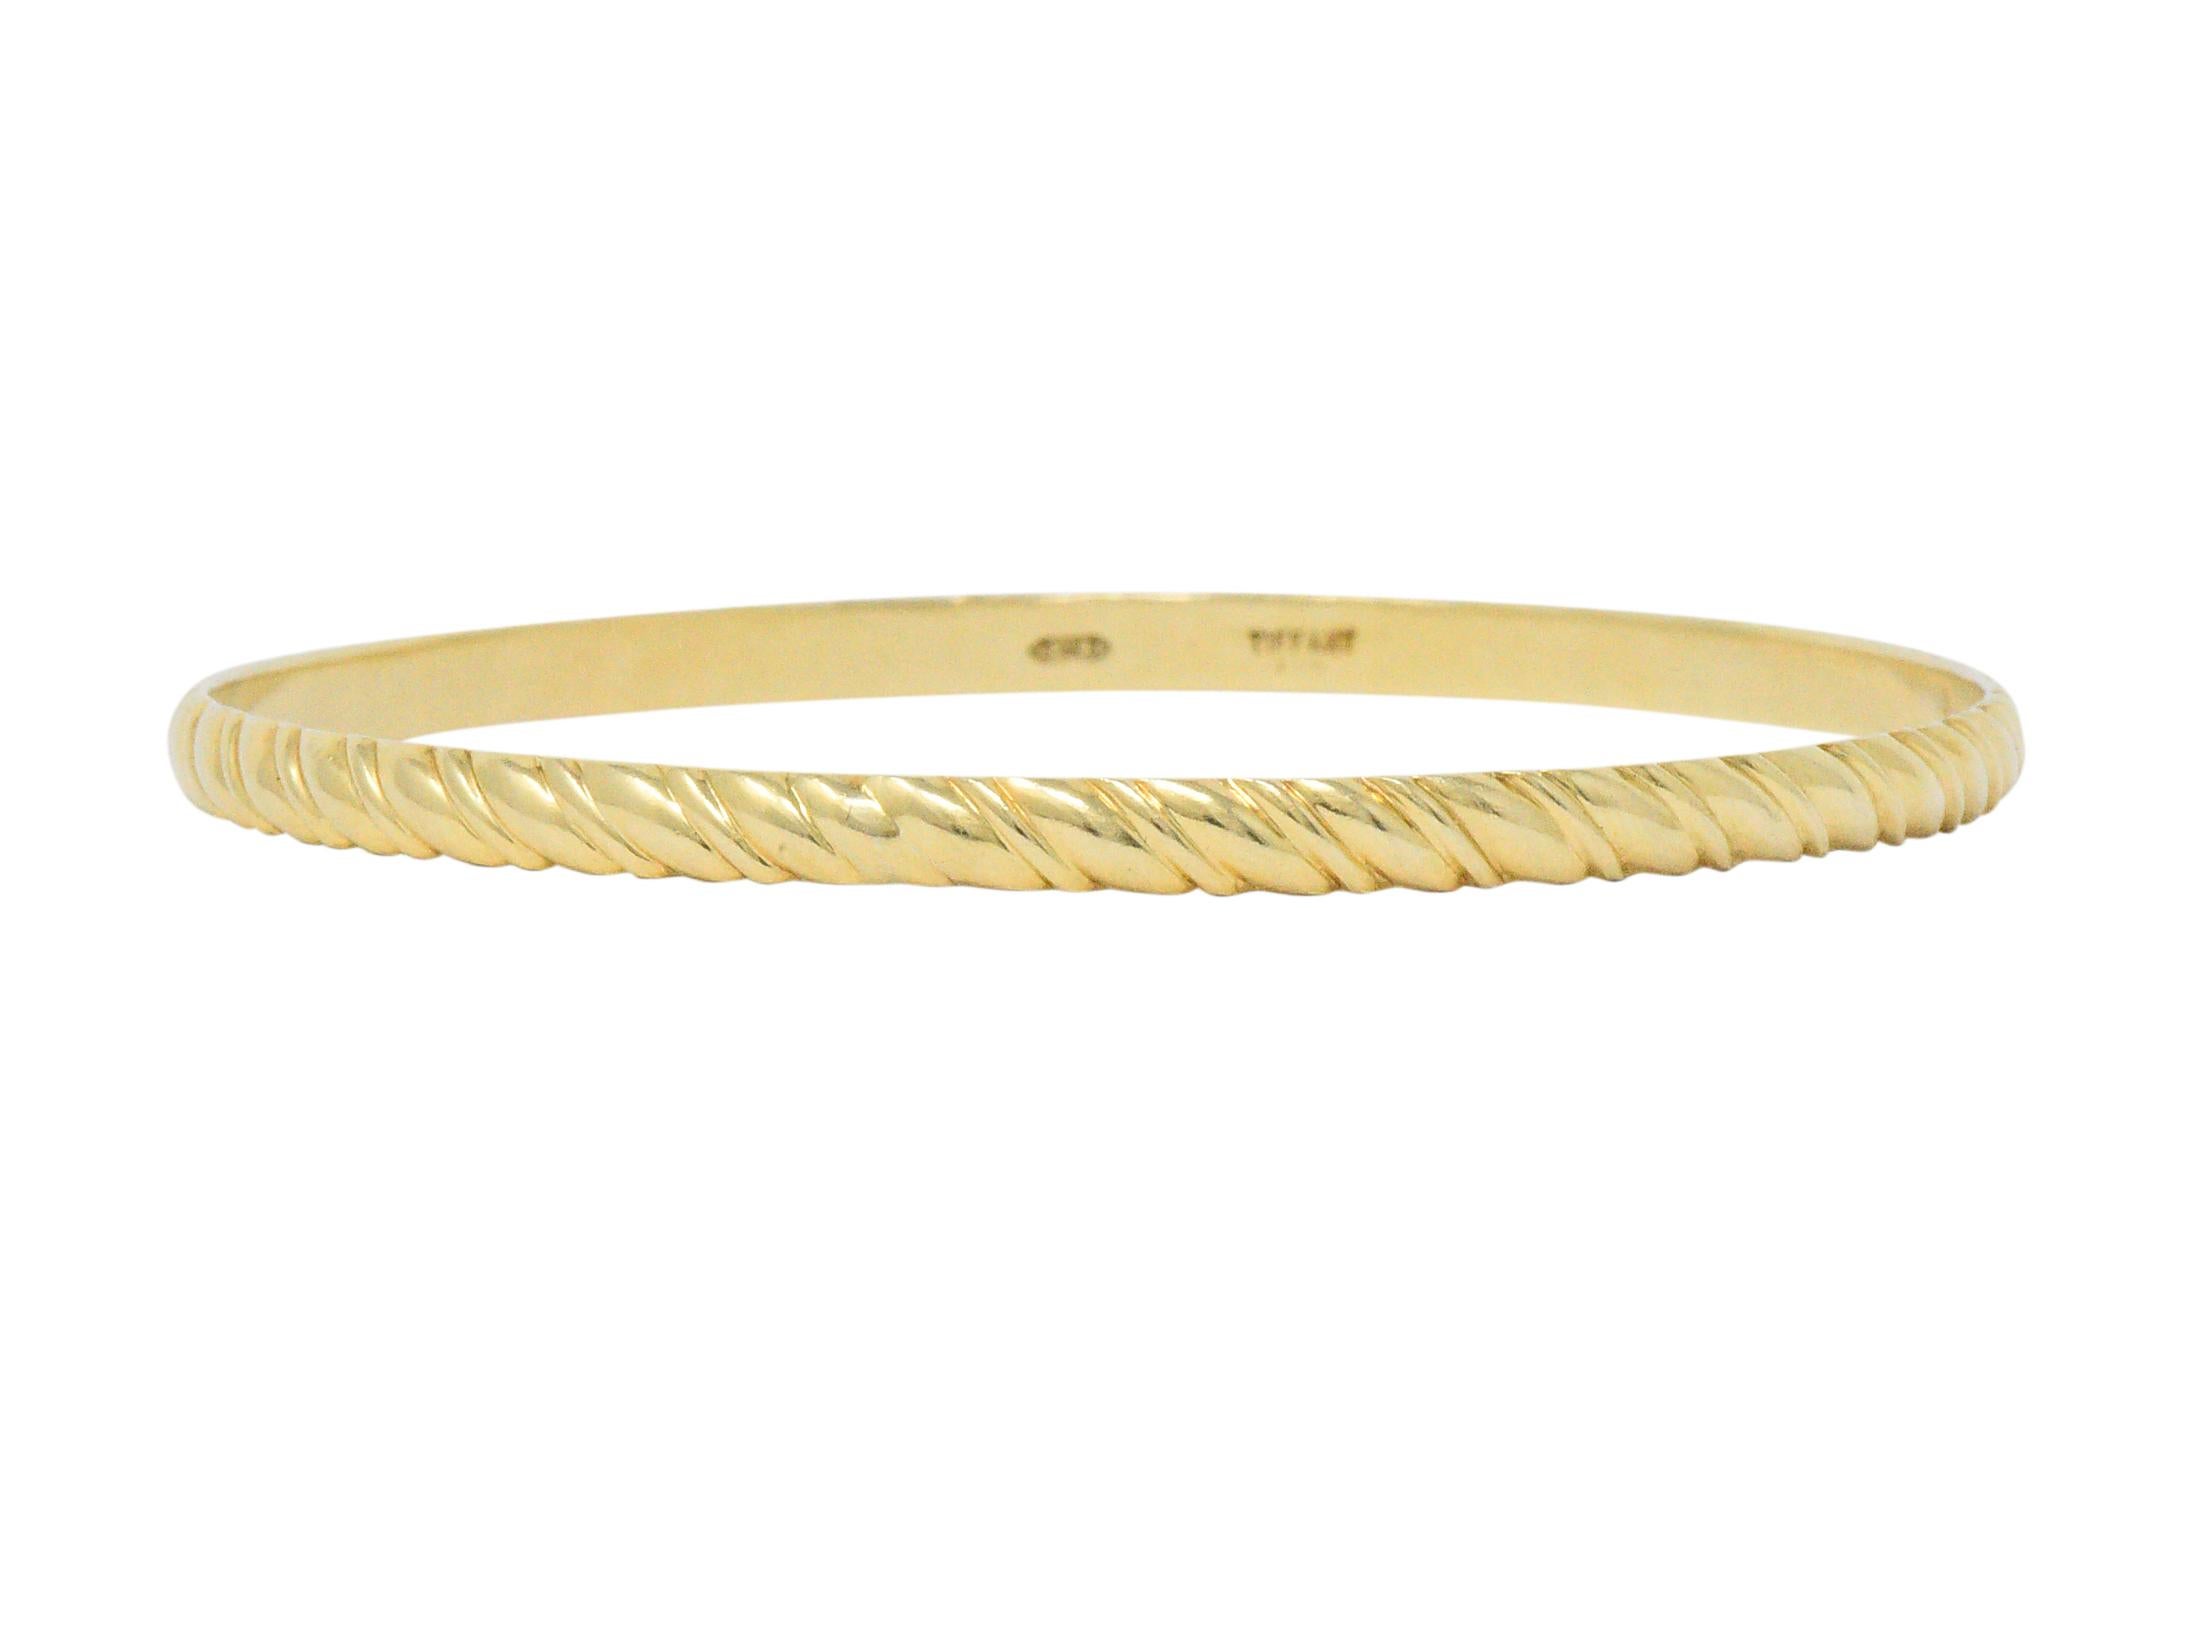 Bangle style bracelet featuring a deeply ribbed texture

Completed by a bright finish

Signed Tiffany

Tested as 14 karat gold

Circa: 1990s

Inner circumference: 7 1/2 inches

Width: 1/8 of an inch

Total weight: 11.5 grams

Thrilling. Stylish.